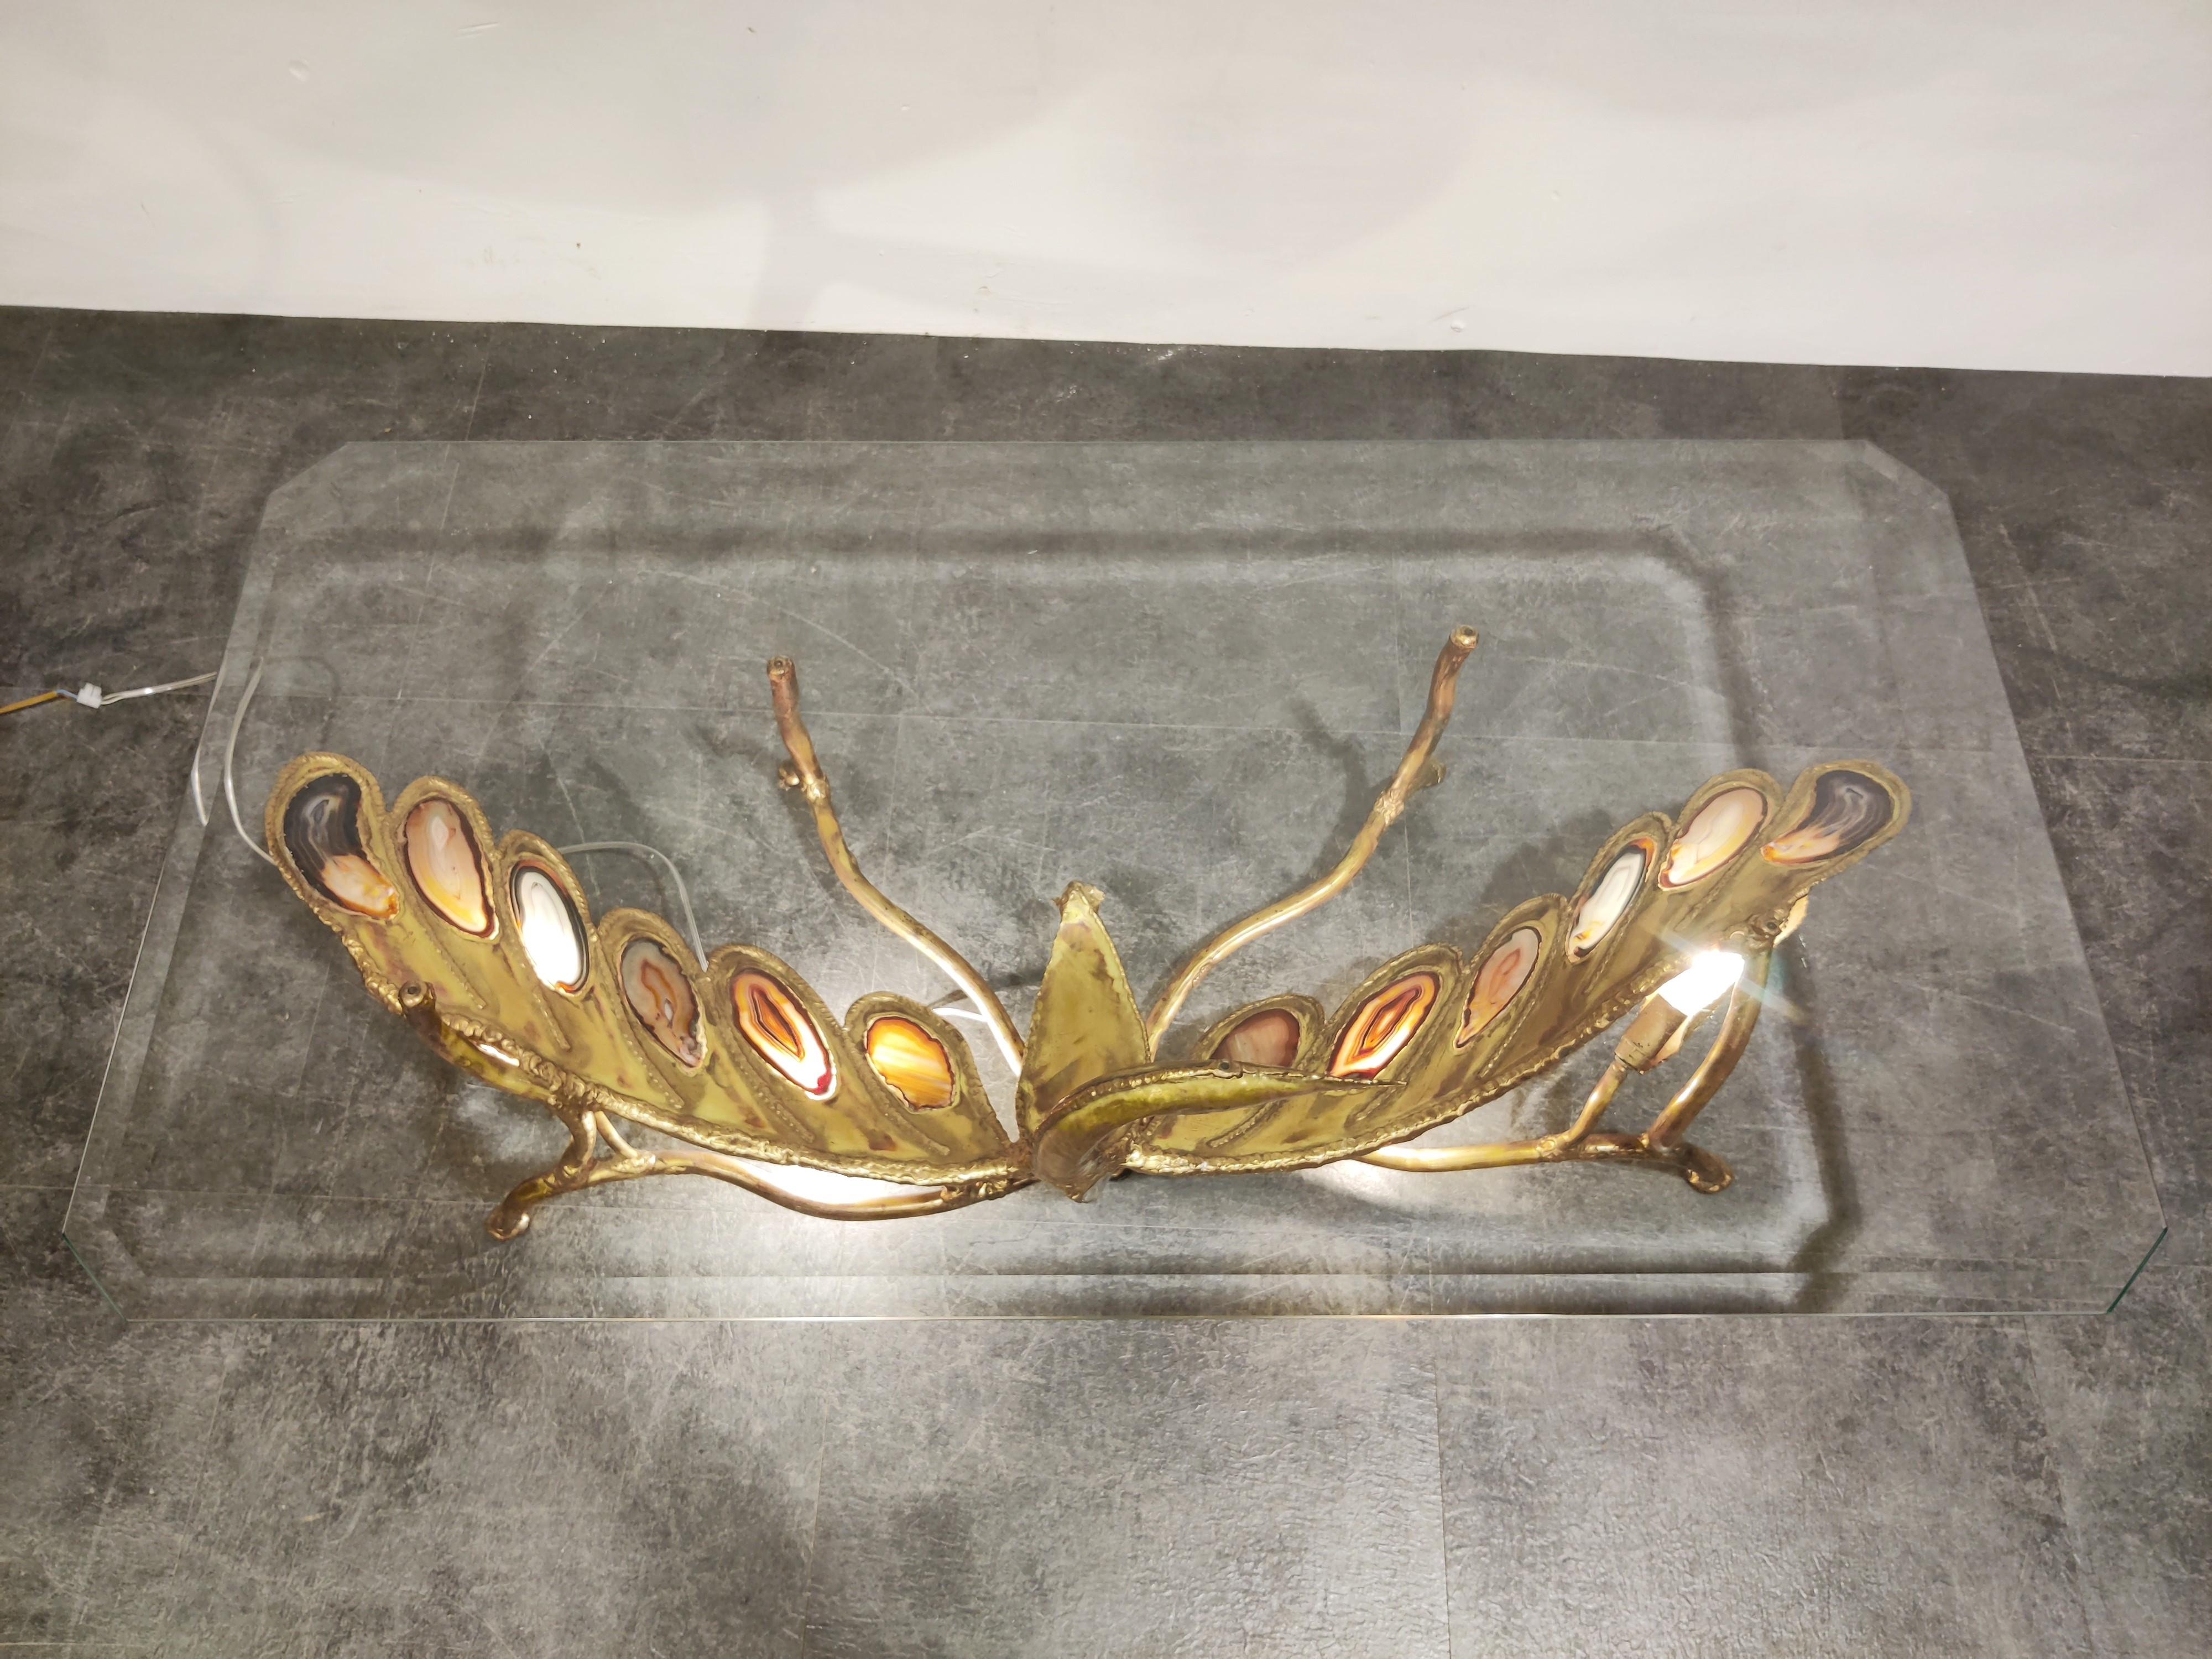 Hollywood Regency Duval Brasseur Era Illuminating Sculptural Bird Coffee Table in Agate and Brass